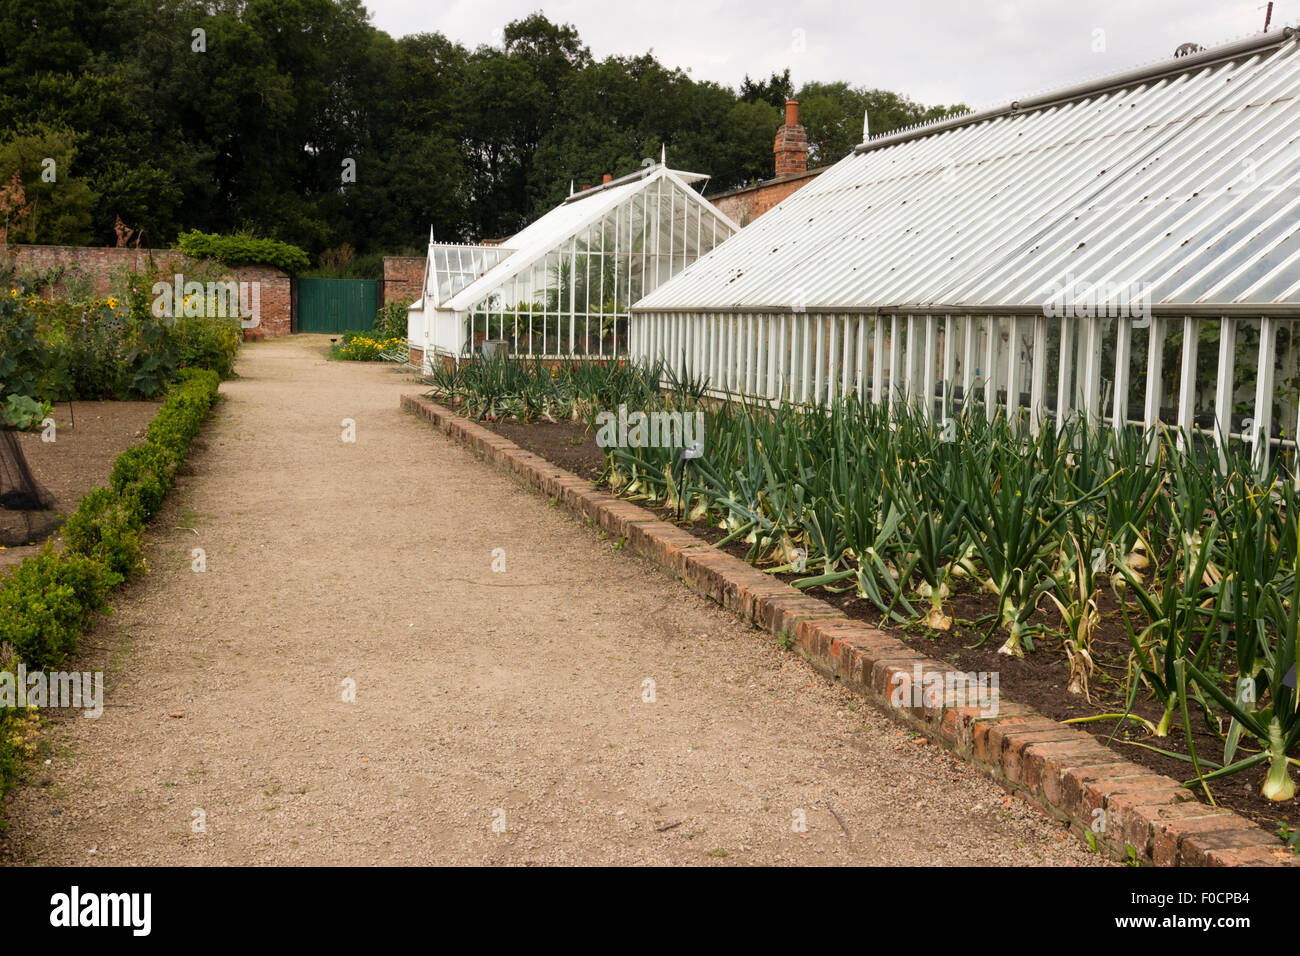 Restored Victorian greenhouses in the walled garden at Normanby Hall, Scunthorpe, UK Stock Photo